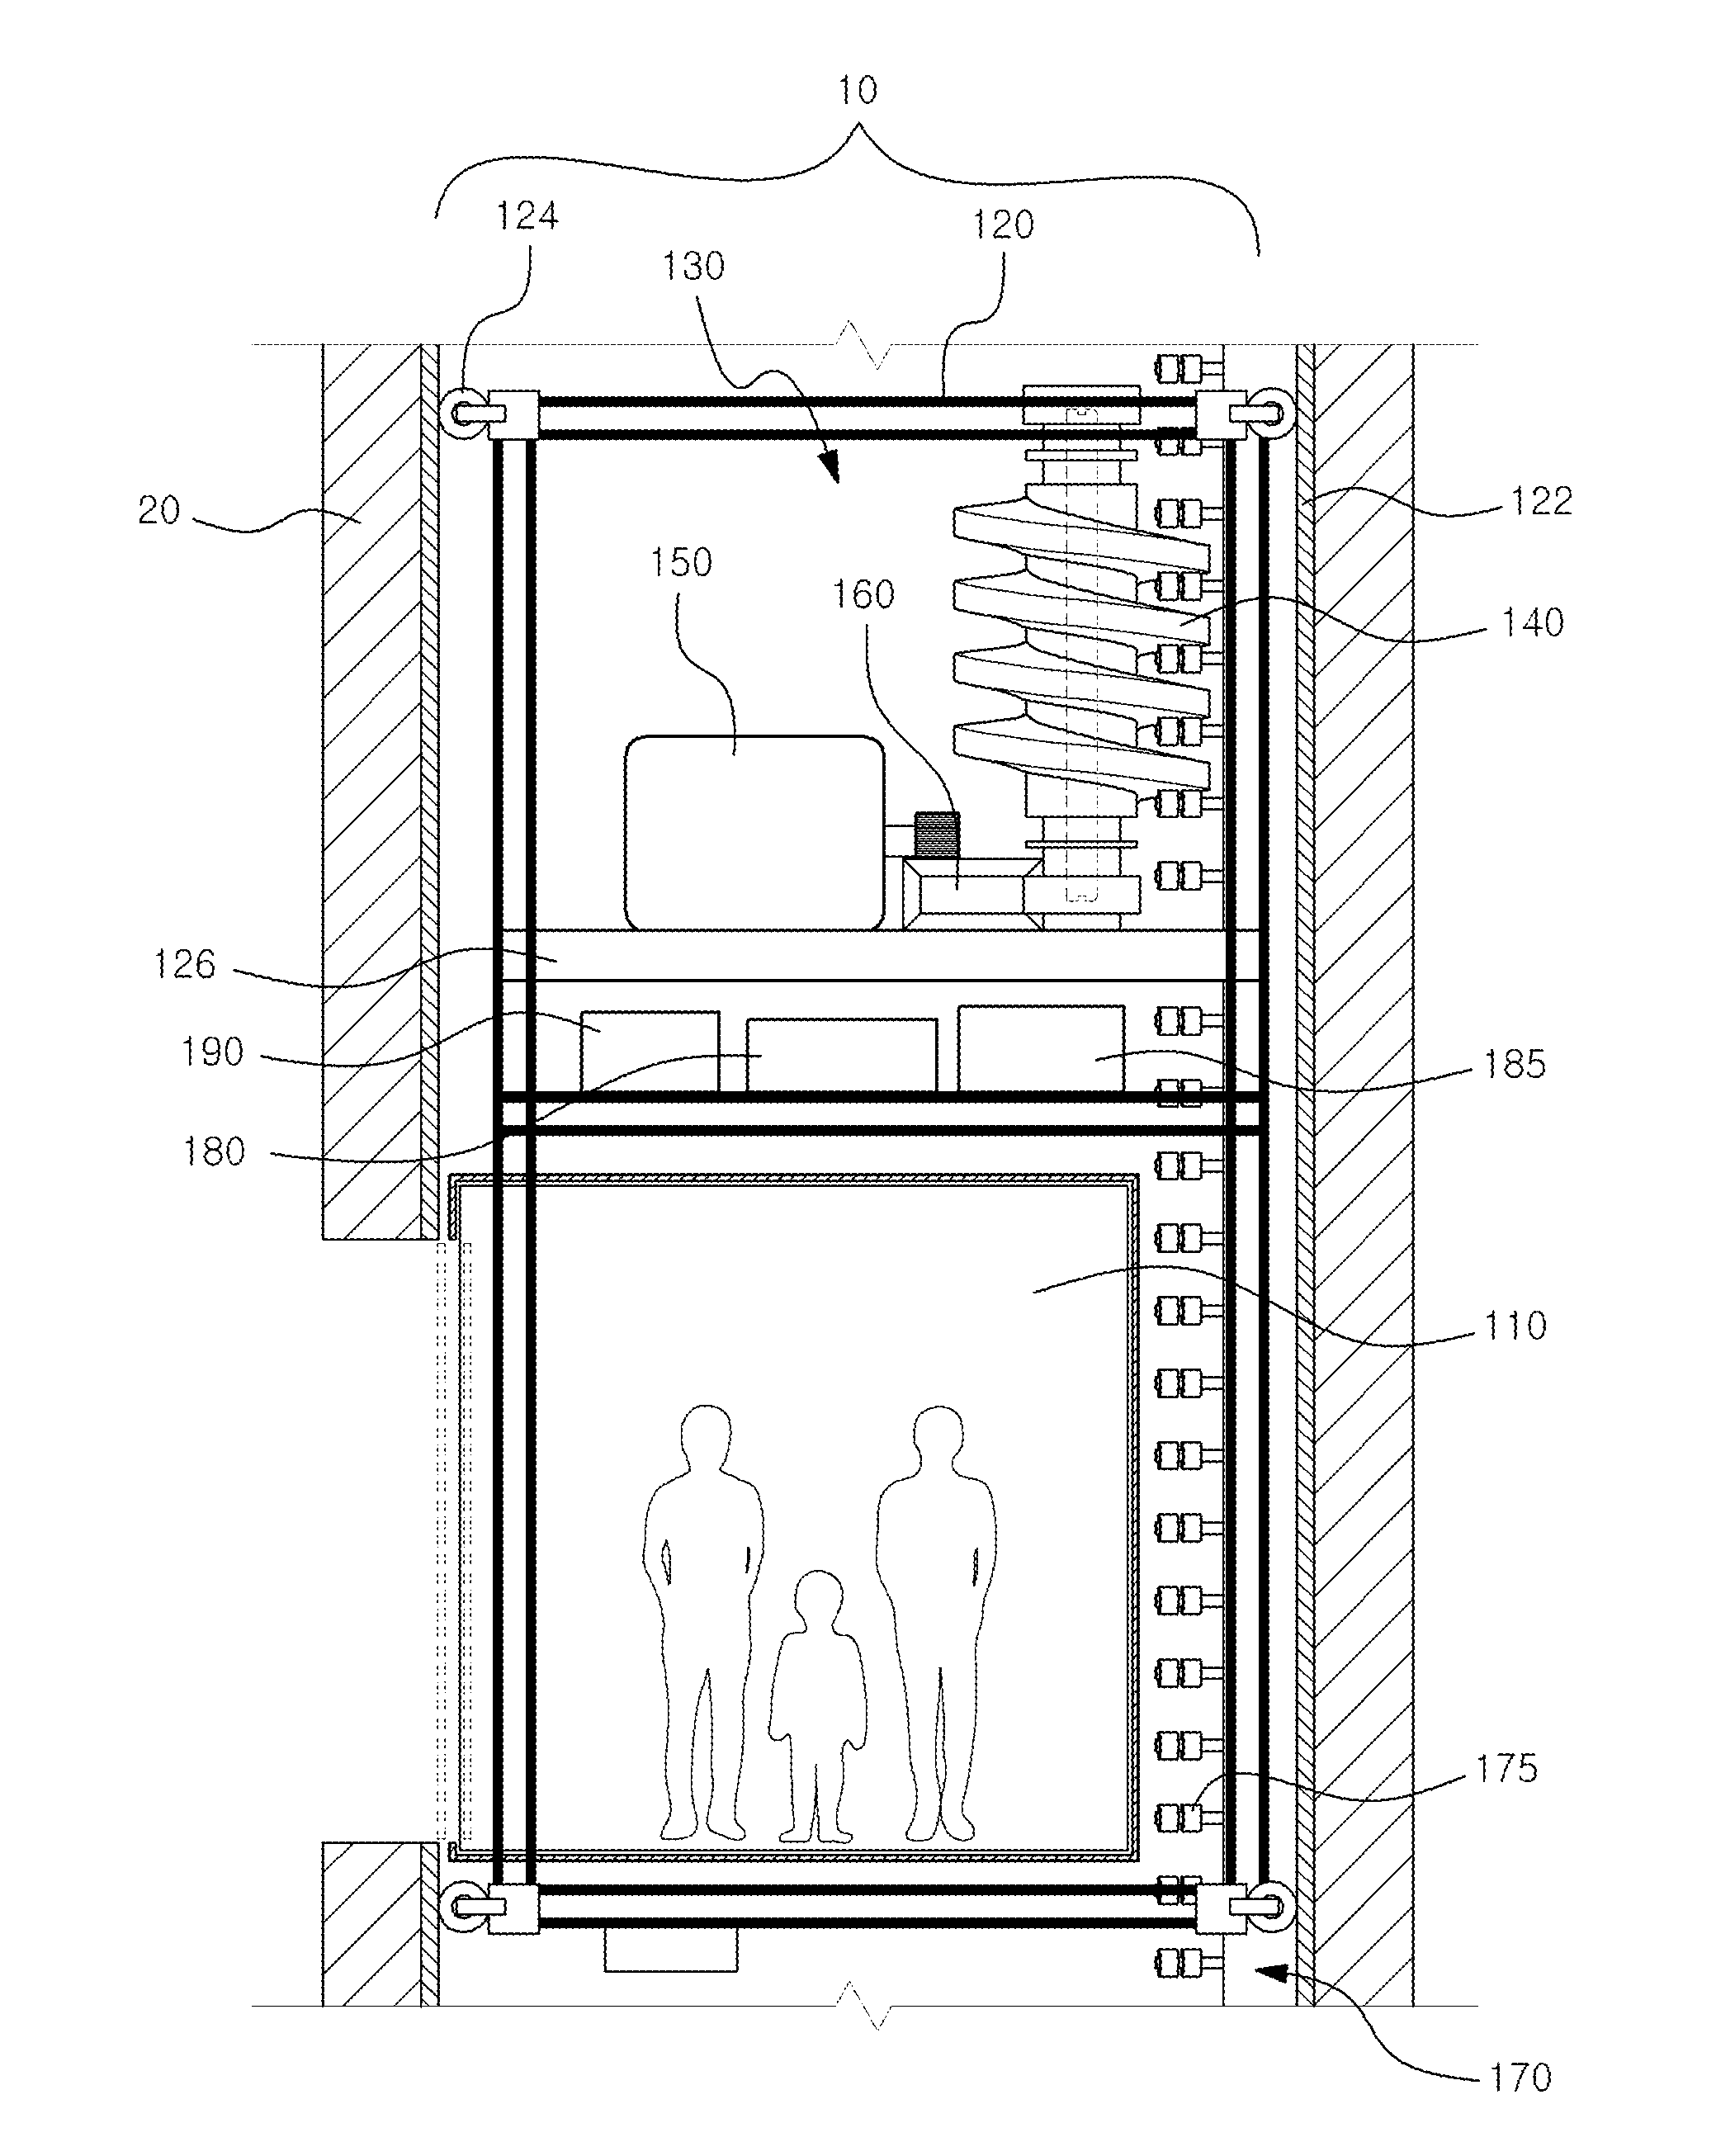 Wormgear shaped driving part, elevator using wormgear shaped driving part and elevating system